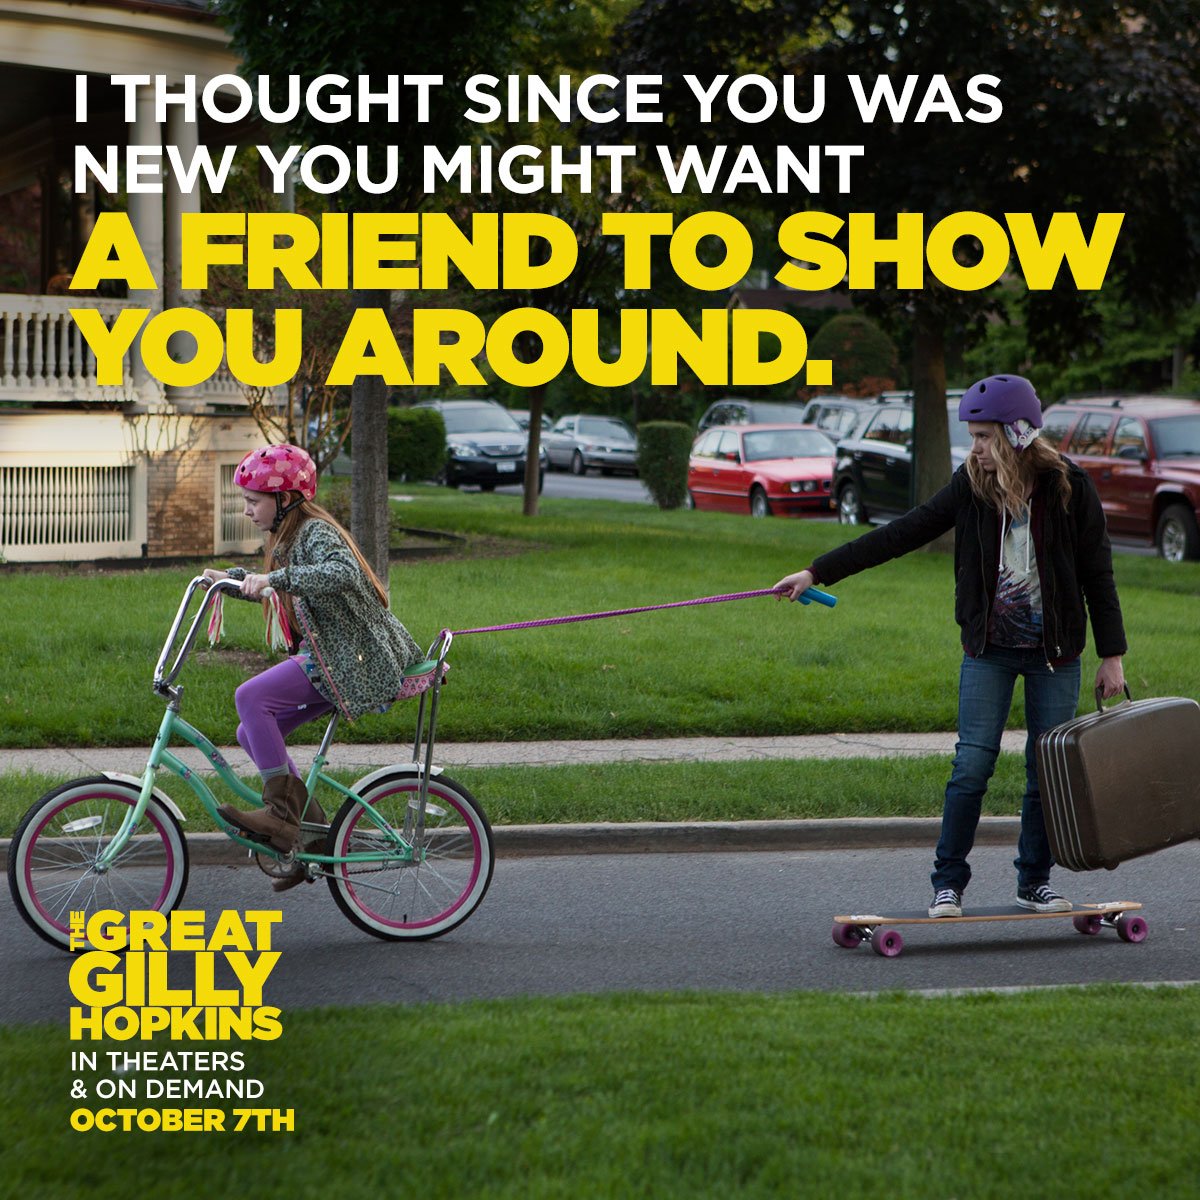 Agnes never gives up on Gilly. Watch #TheGreatGillyHopkins in theaters and on demand now!